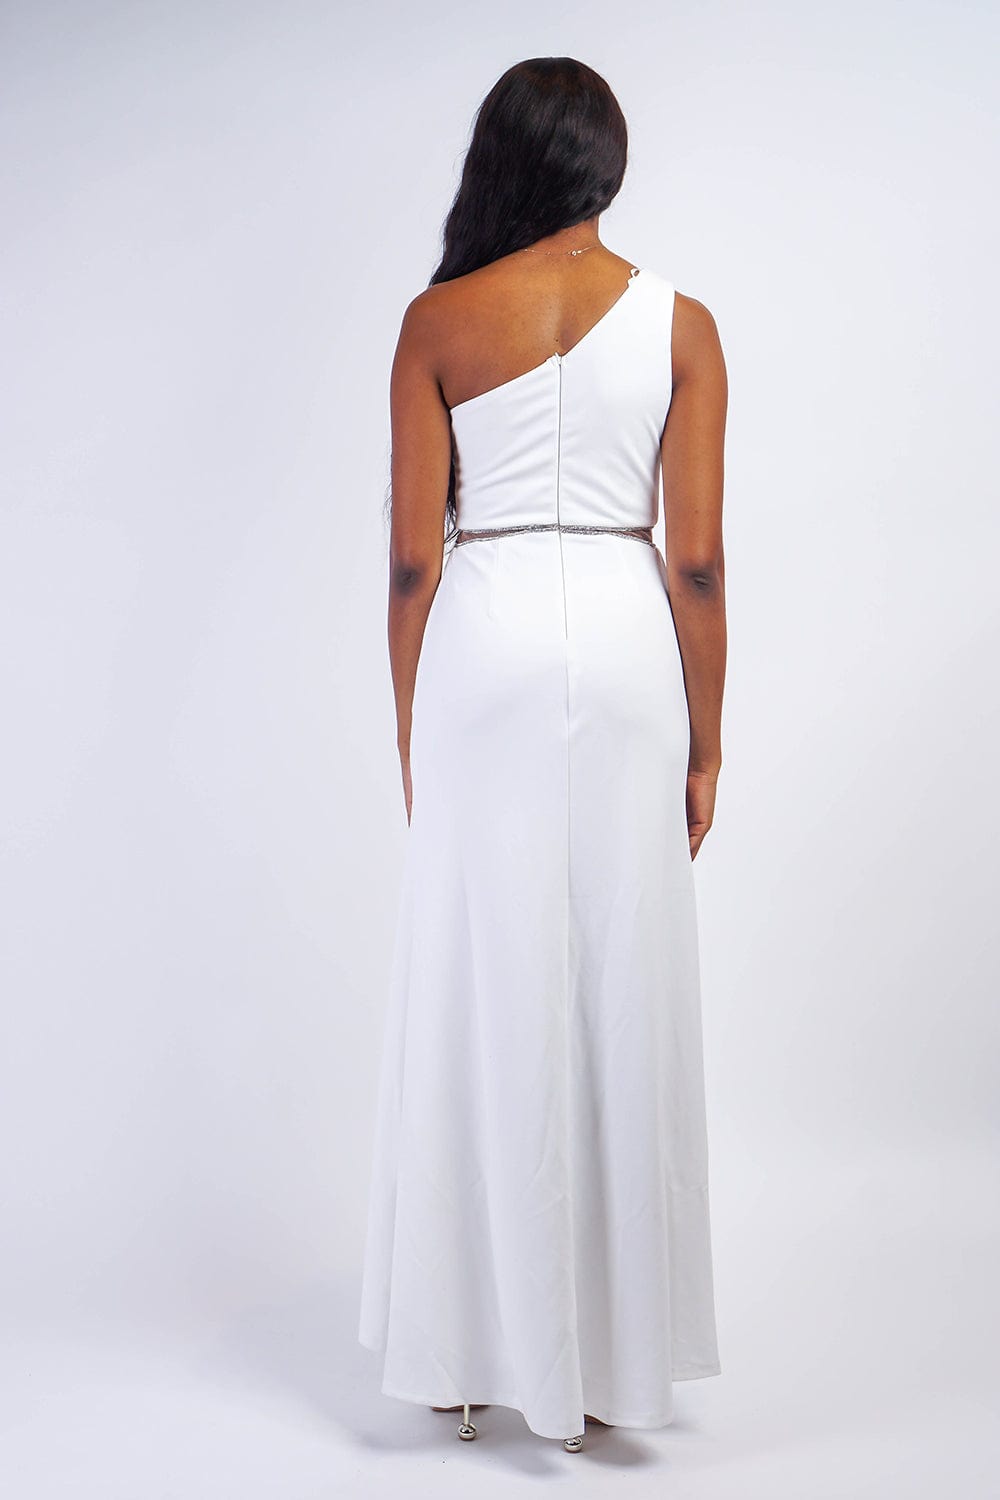 GOWNS White One Shoulder Crystal Trim Gown - Chloe Dao